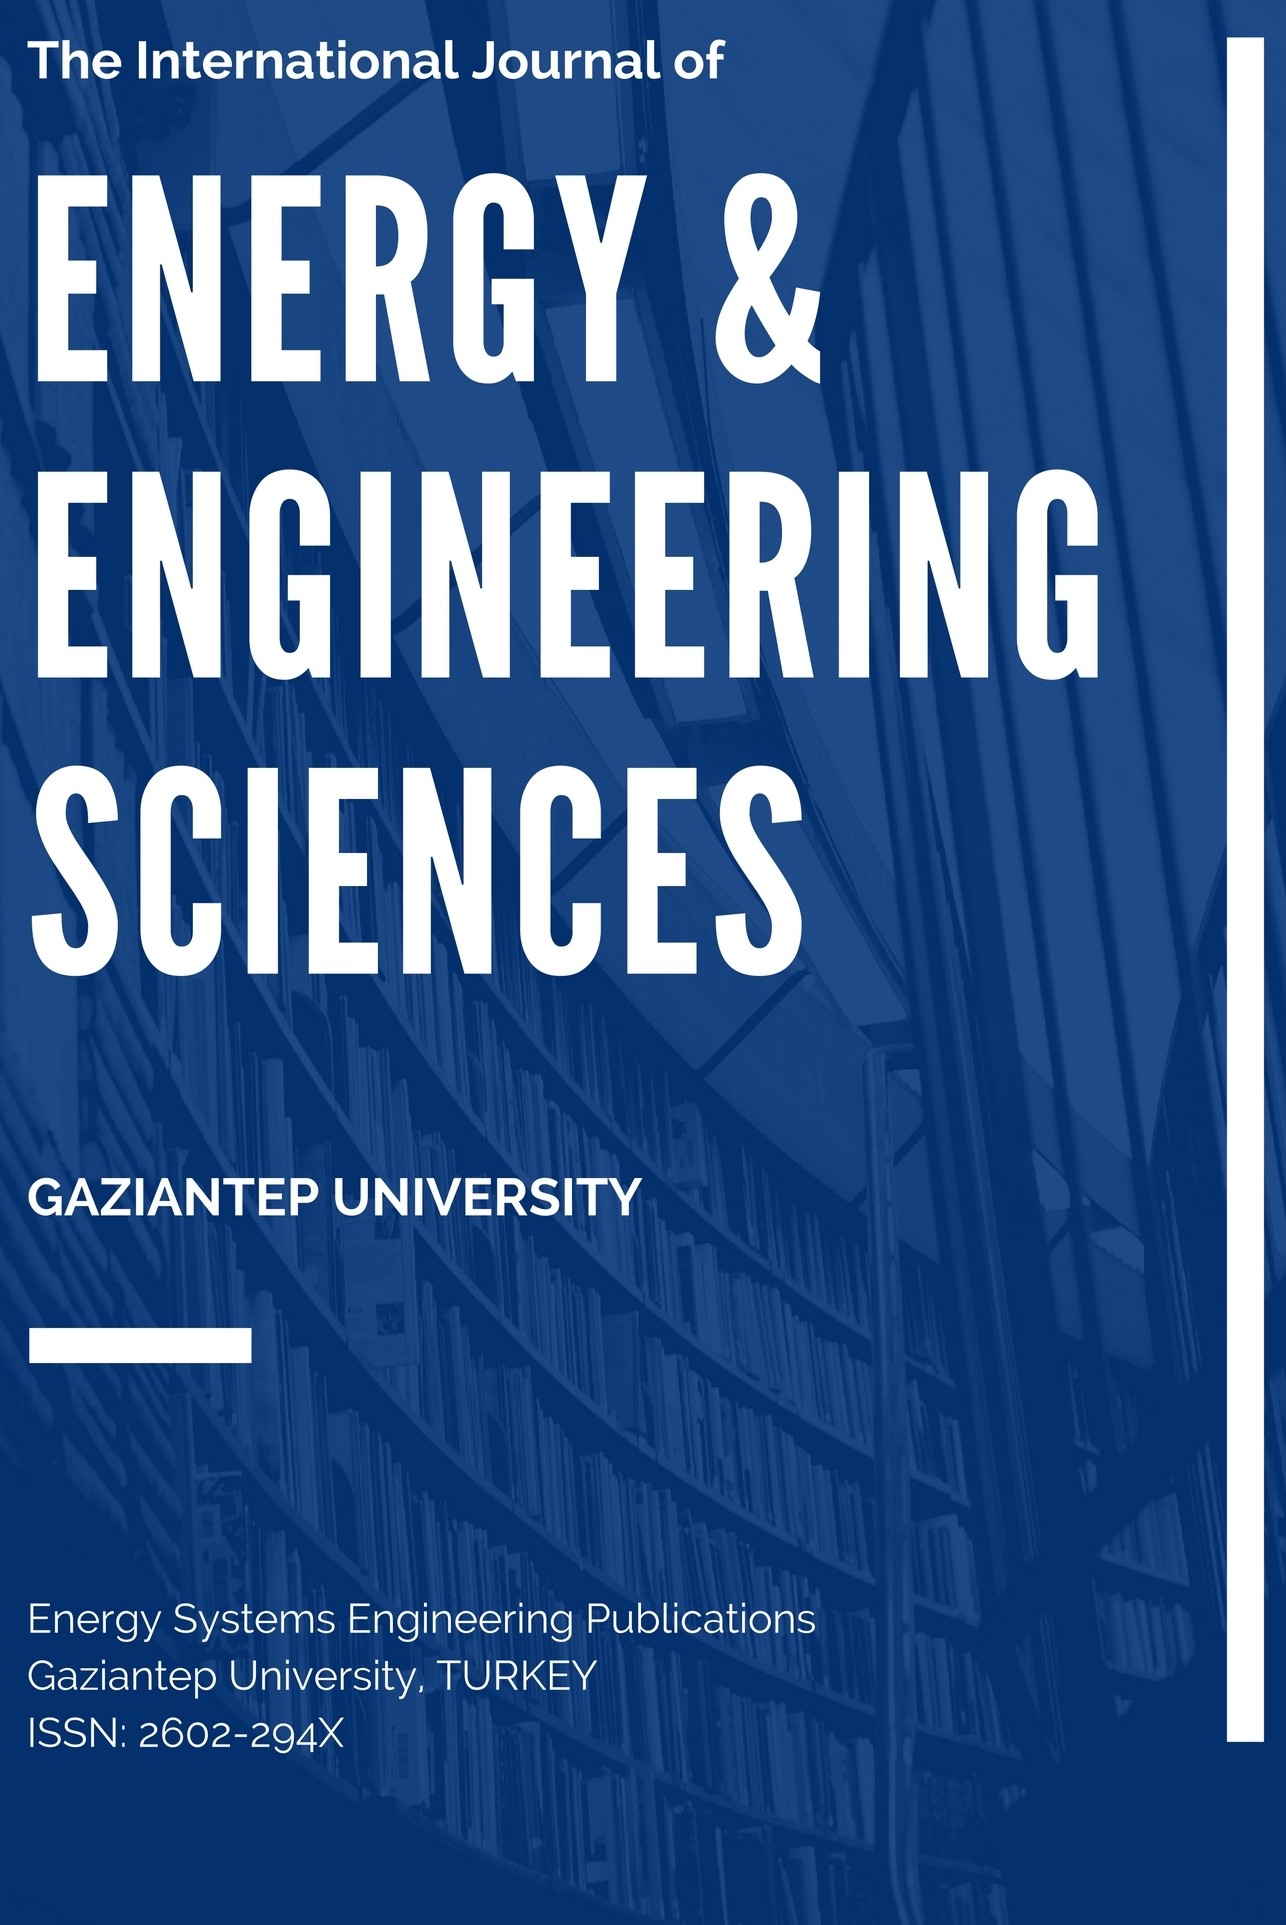 The International Journal of Energy and Engineering Sciences